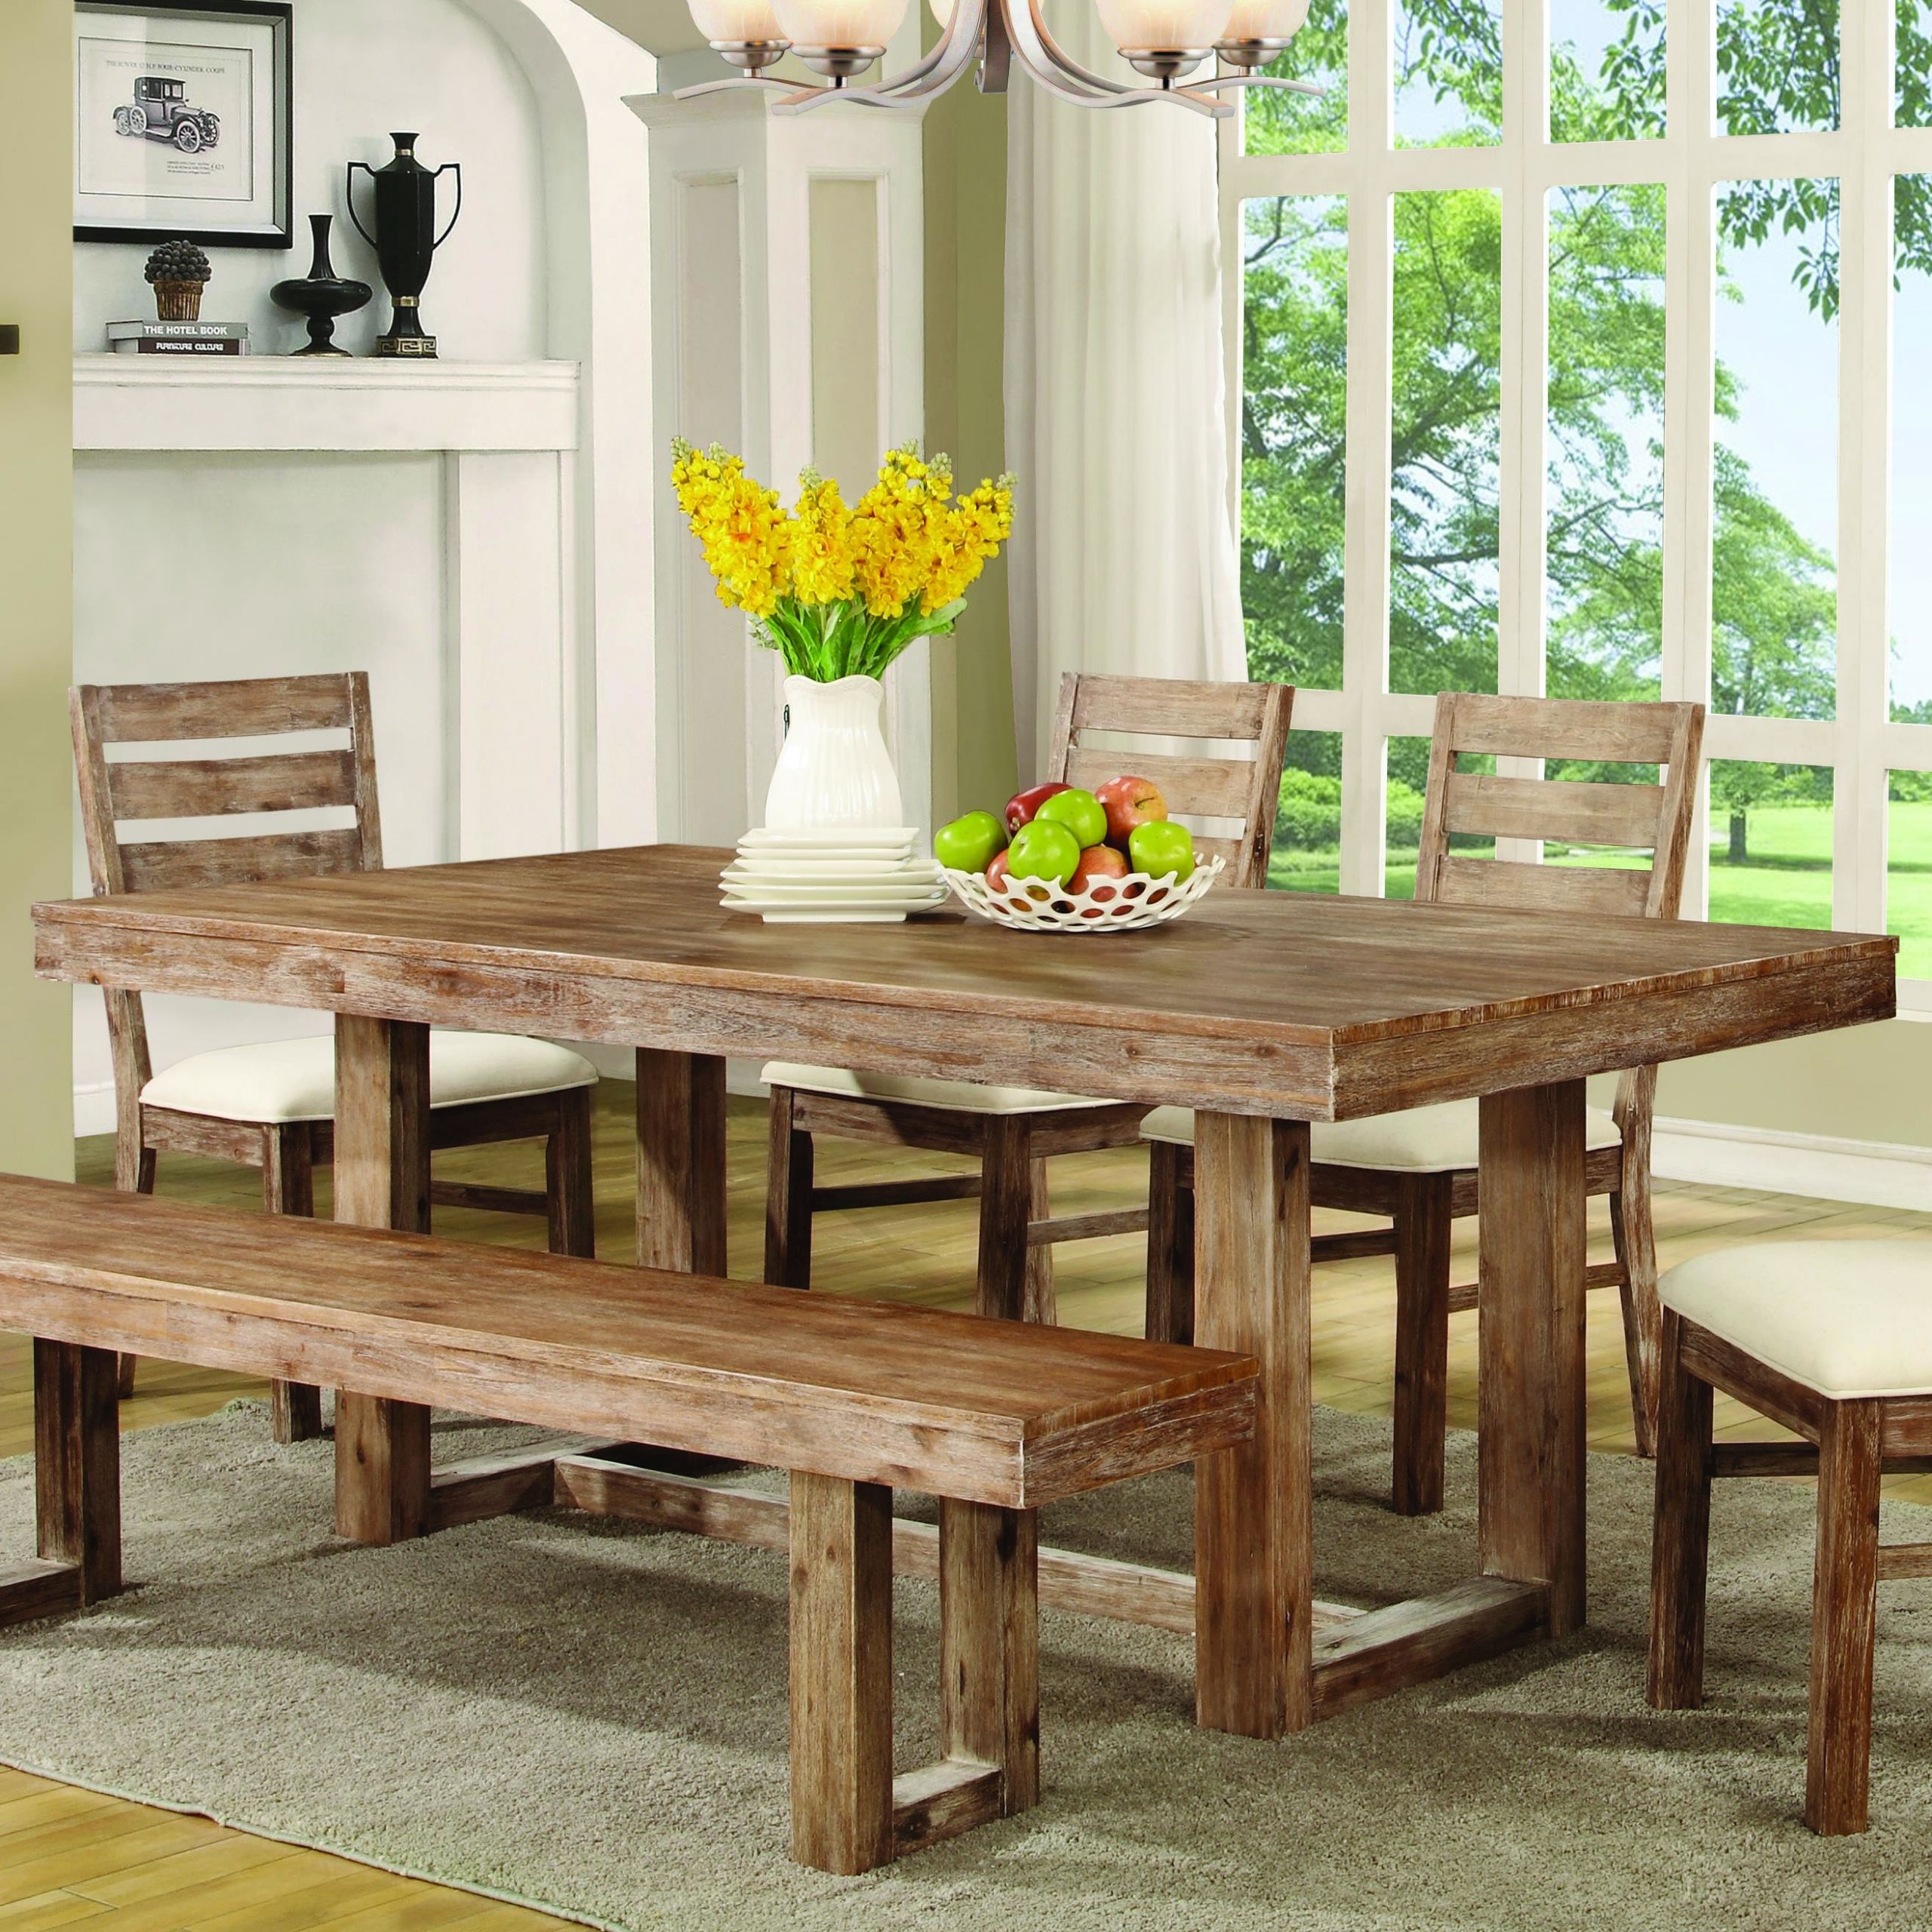 Rustic Kitchen Chairs
 Coaster Elmwood Rustic "U" Base Dining Table